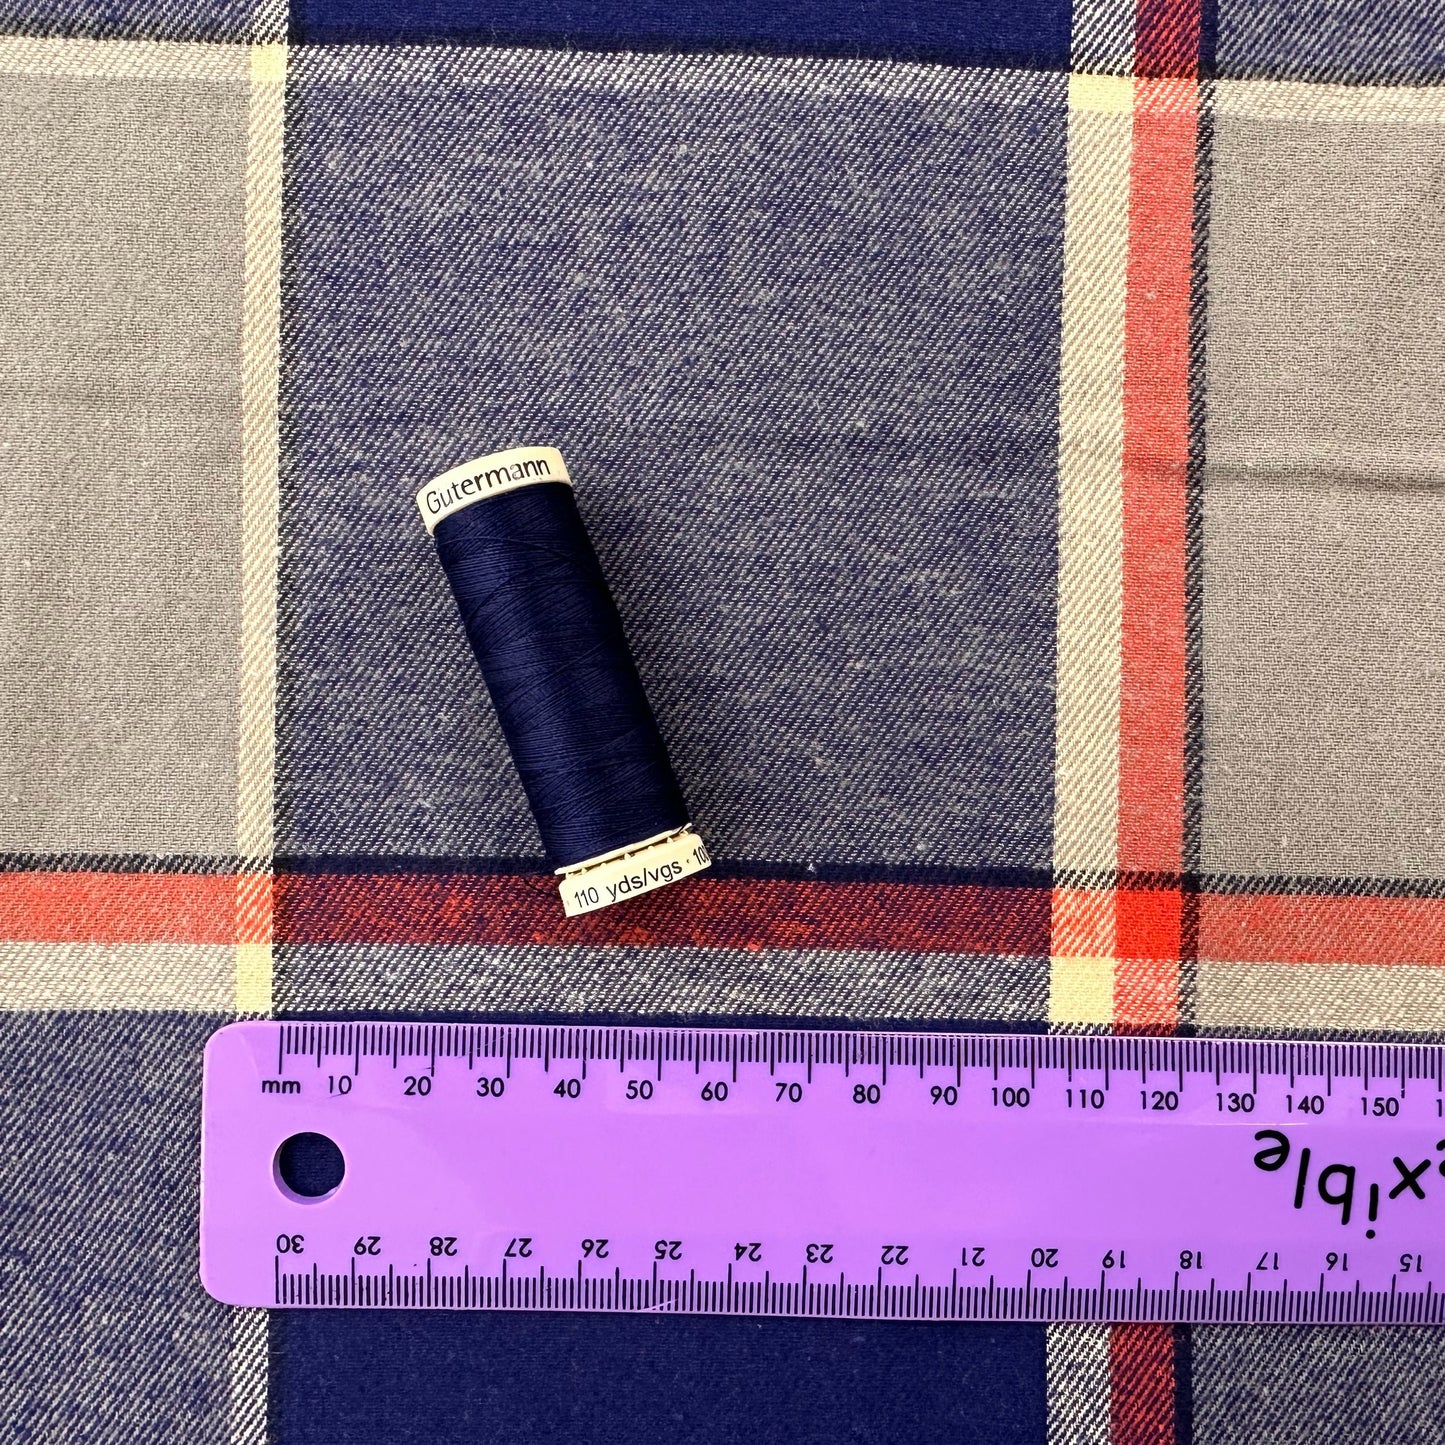 100% Cotton Flannel Check - Navy